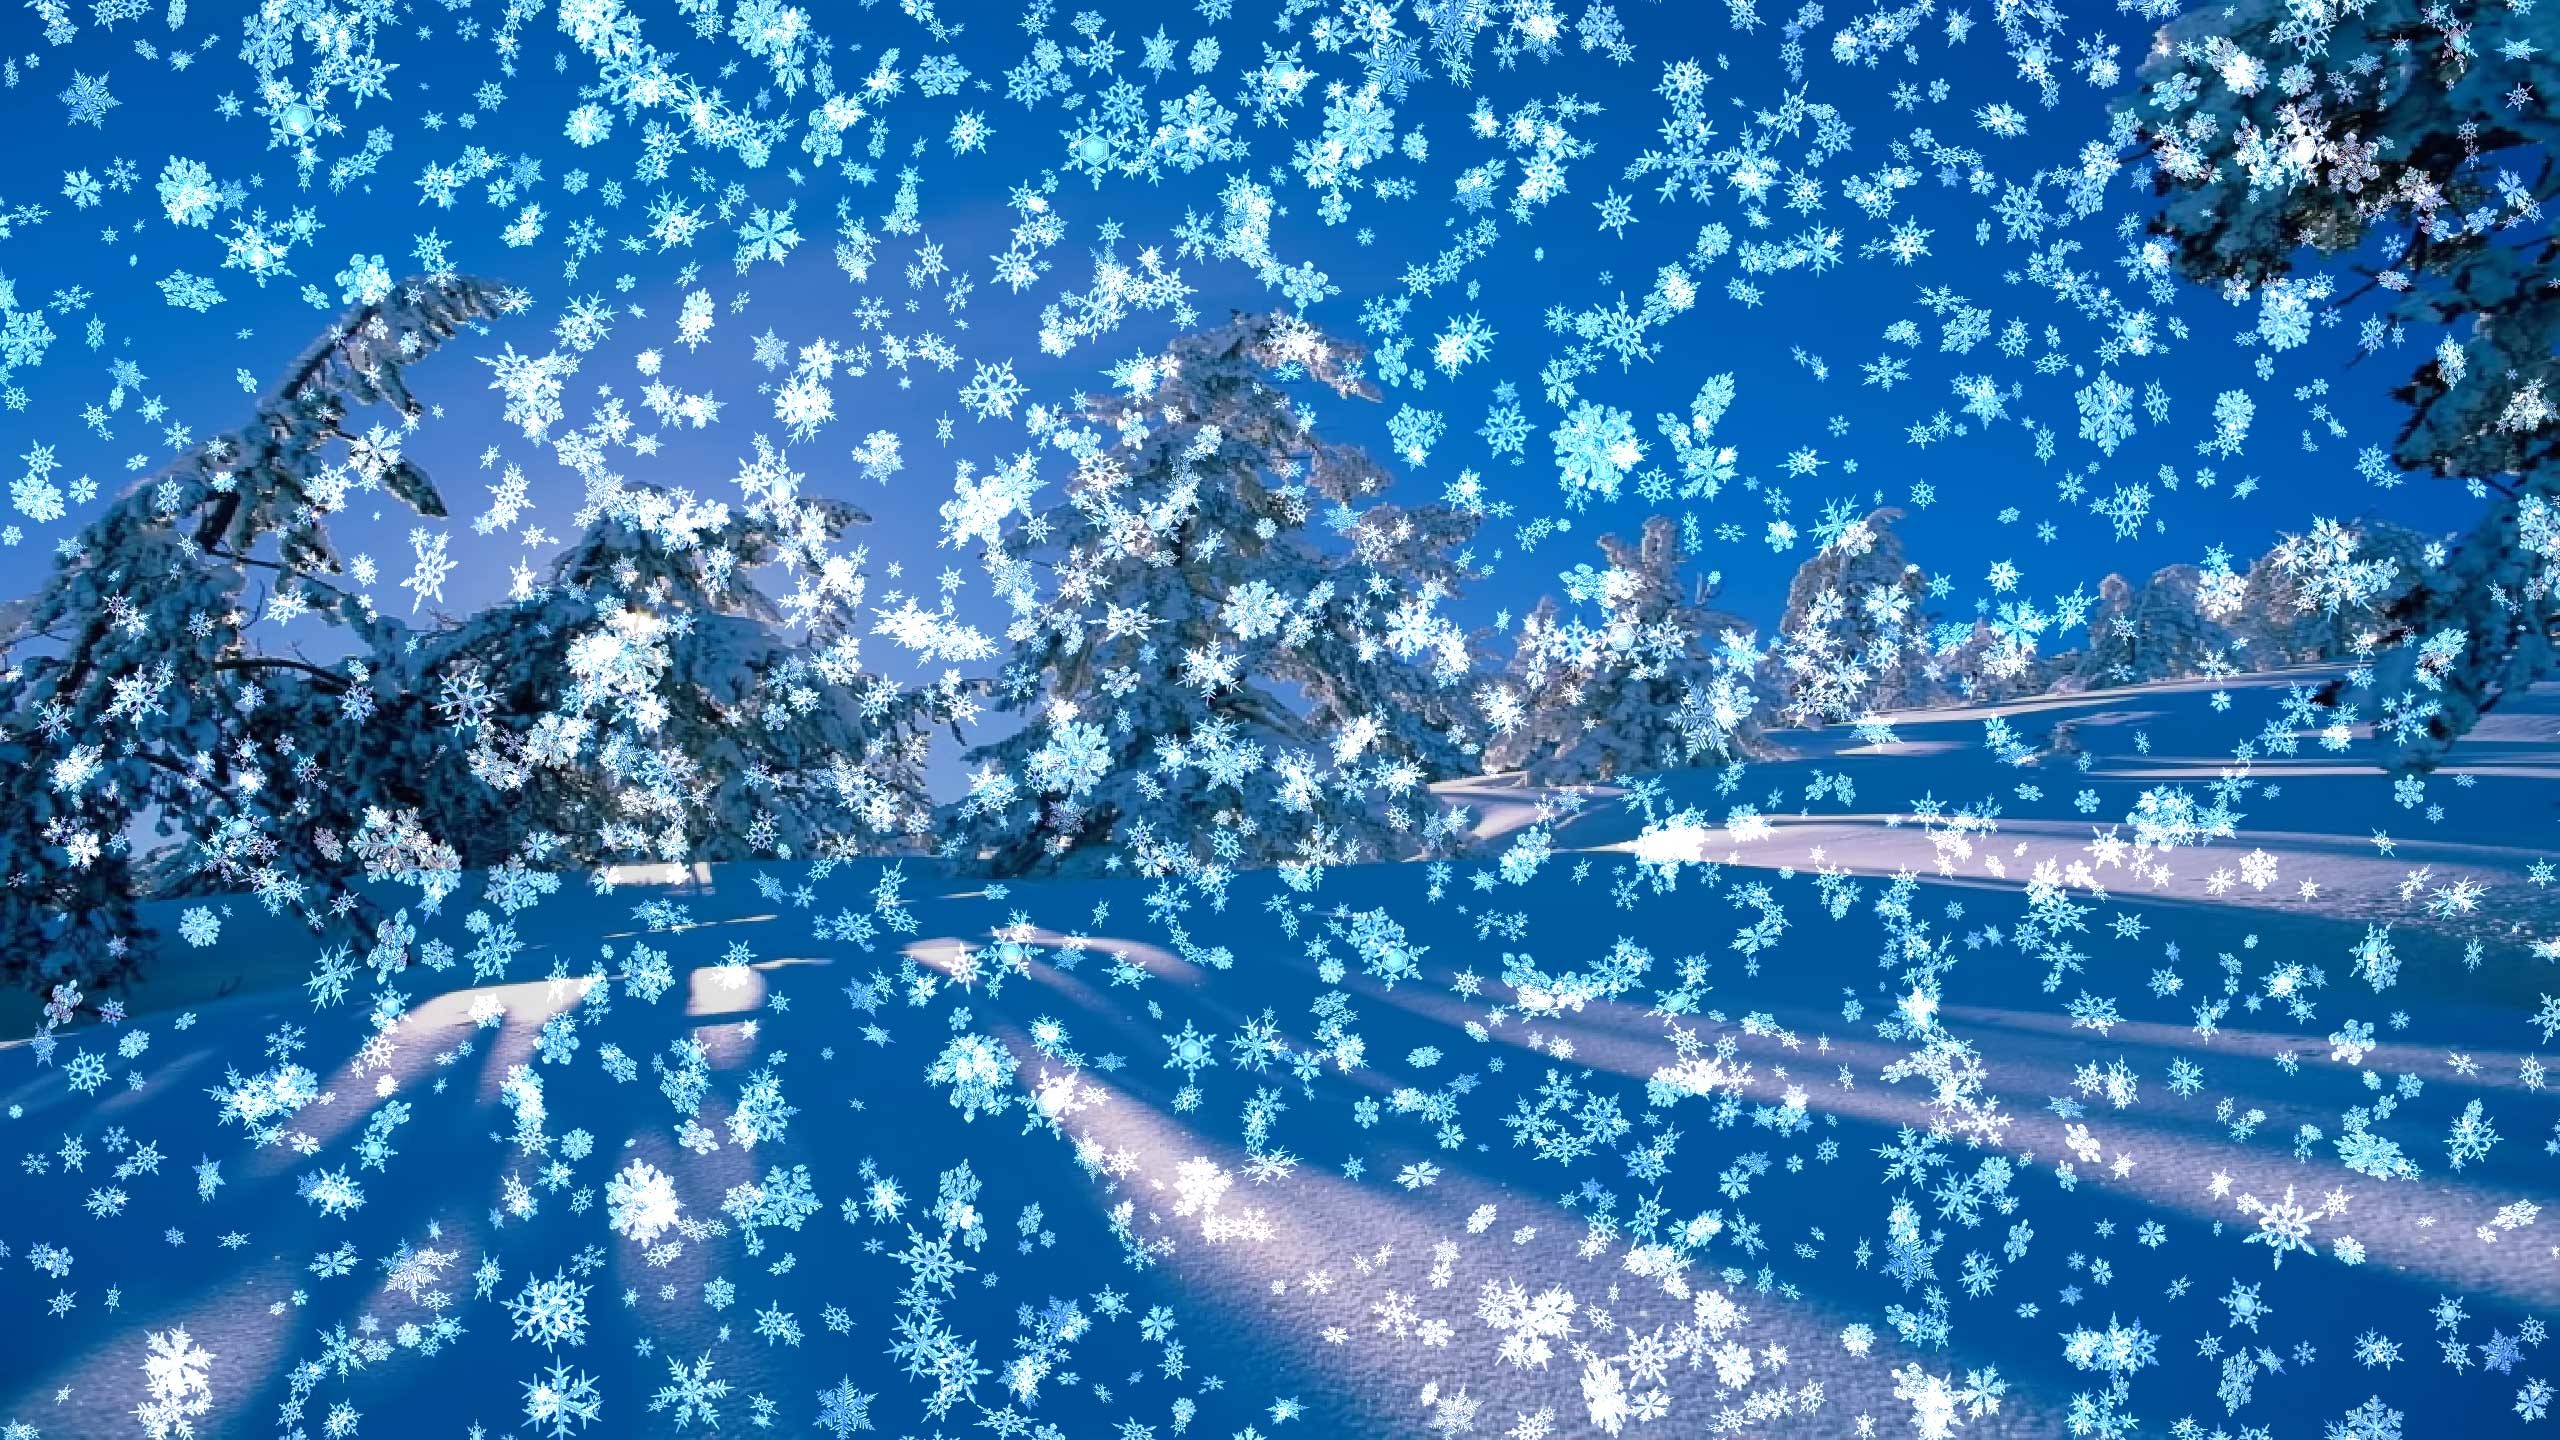 2560x1440 A beautiful snow scene with falling snow on your desktop, blue sky, trees  covered with snow. Animated falling ...